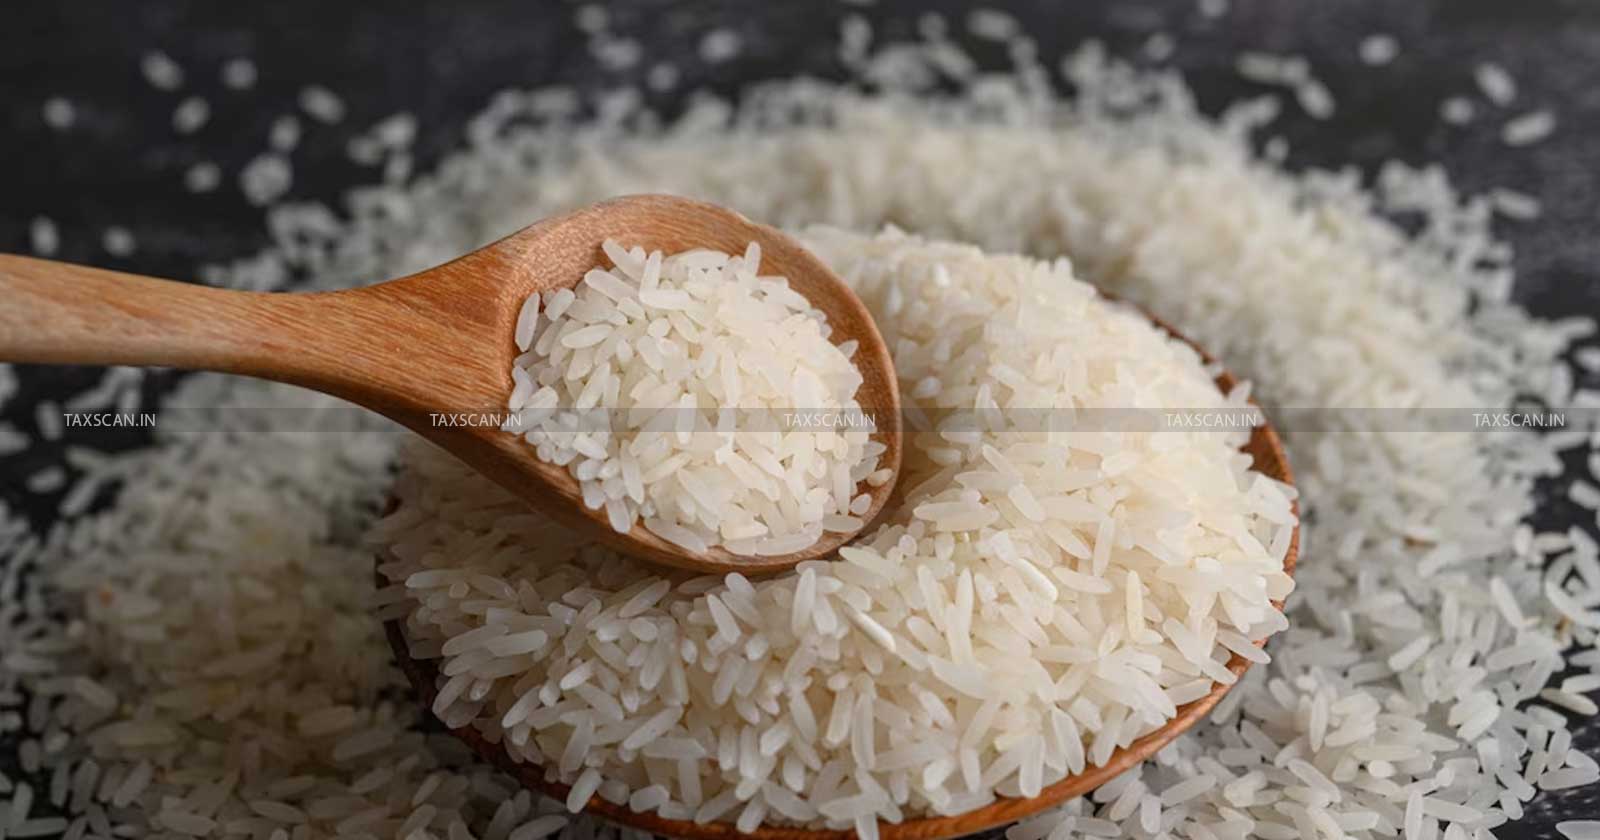 Central Govt authorizes Export - Central Government - Export - Non-Basmati White Rice - UAE via National Cooperative Exports Limited